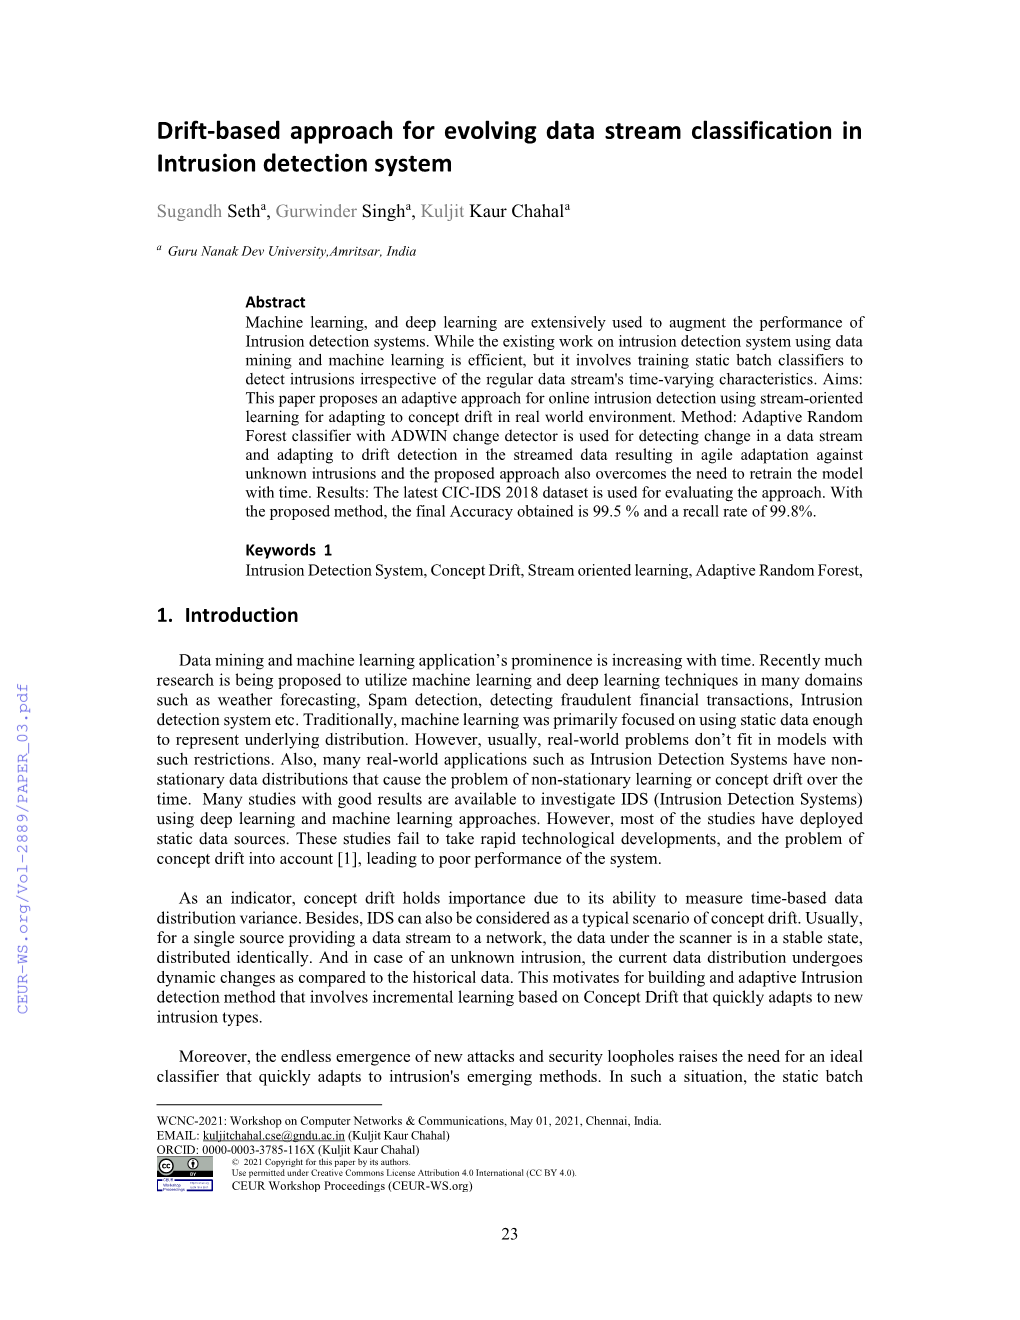 Drift-Based Approach for Evolving Data Stream Classification in Intrusion Detection System